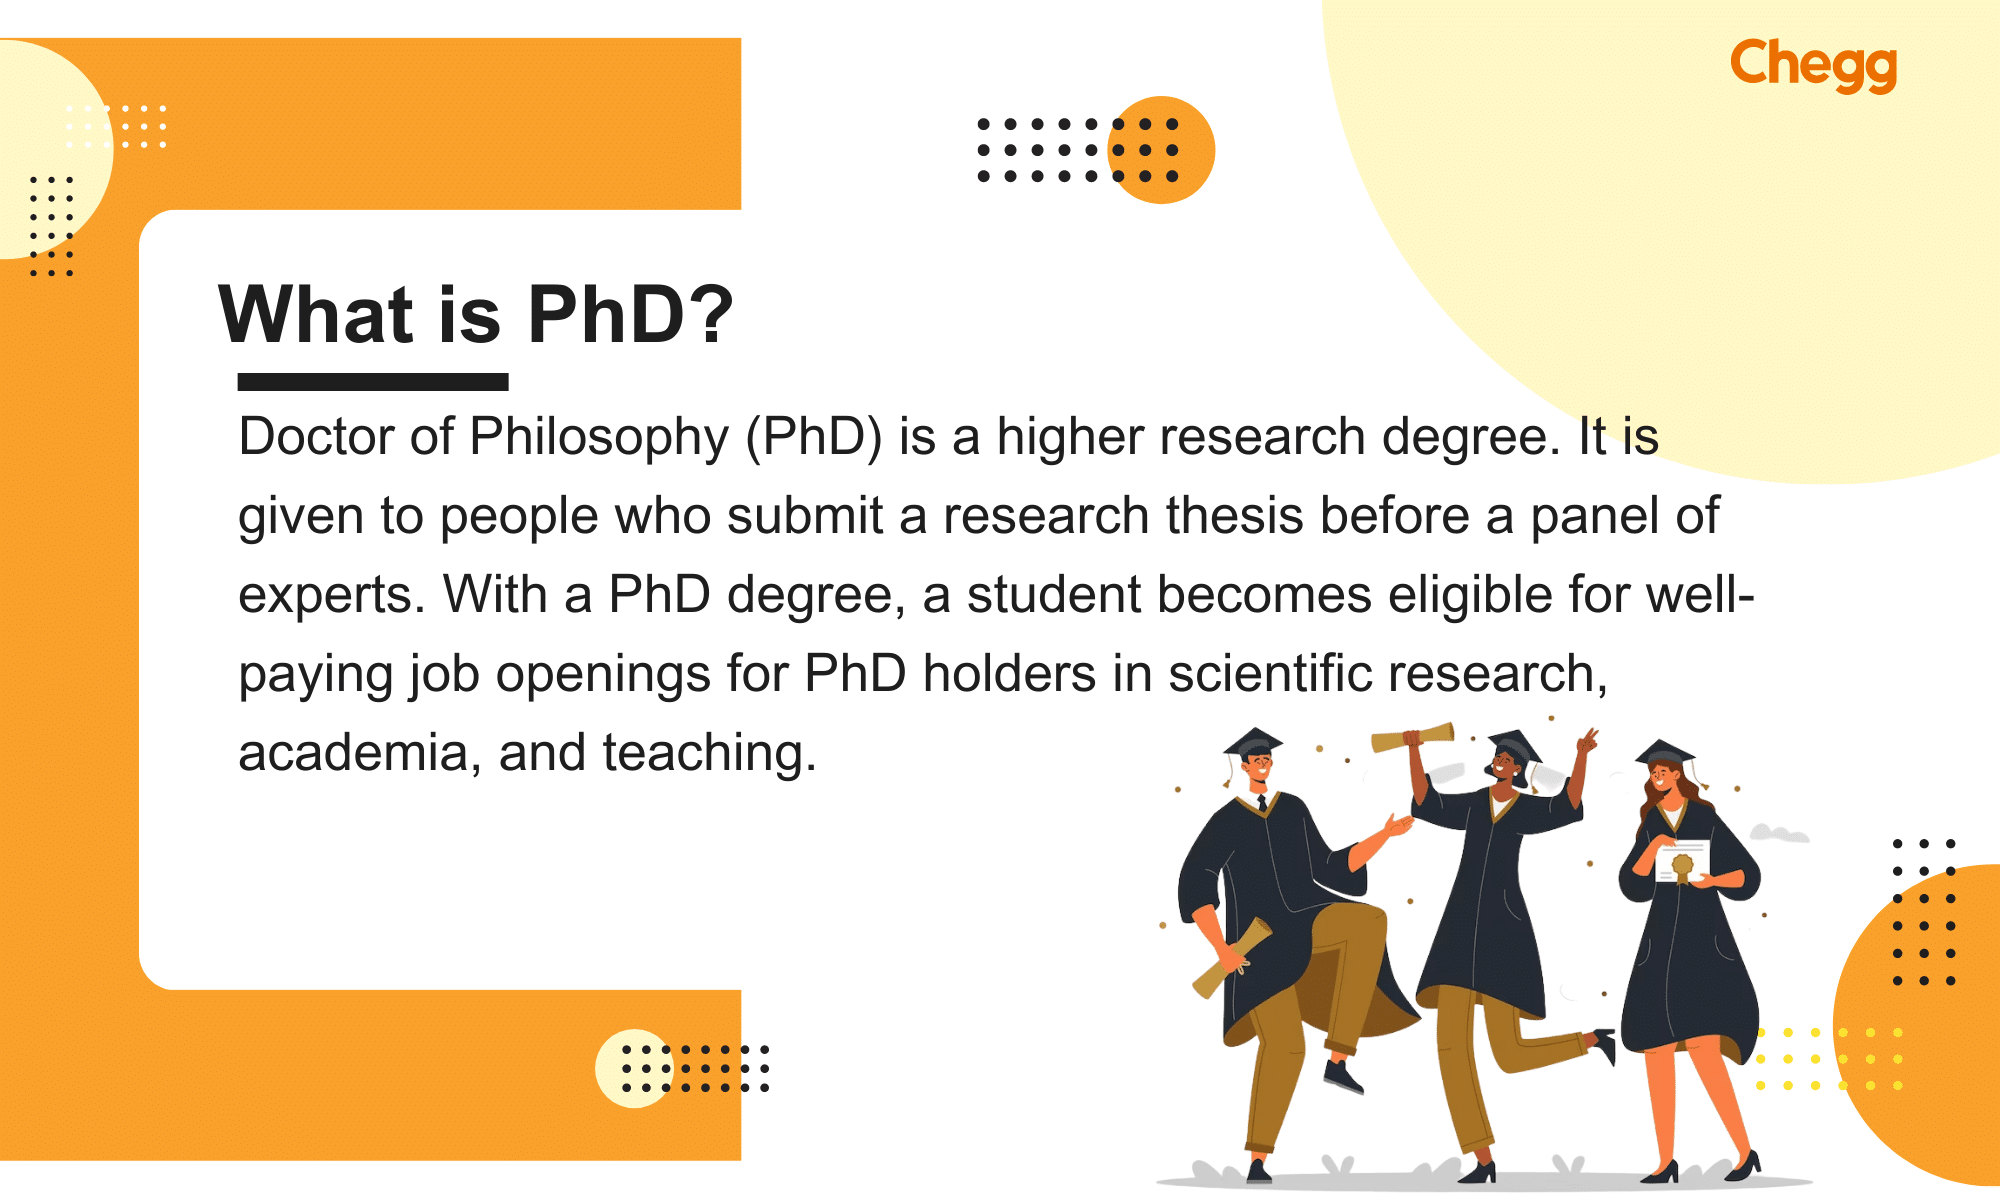 how to buy phd degree in india